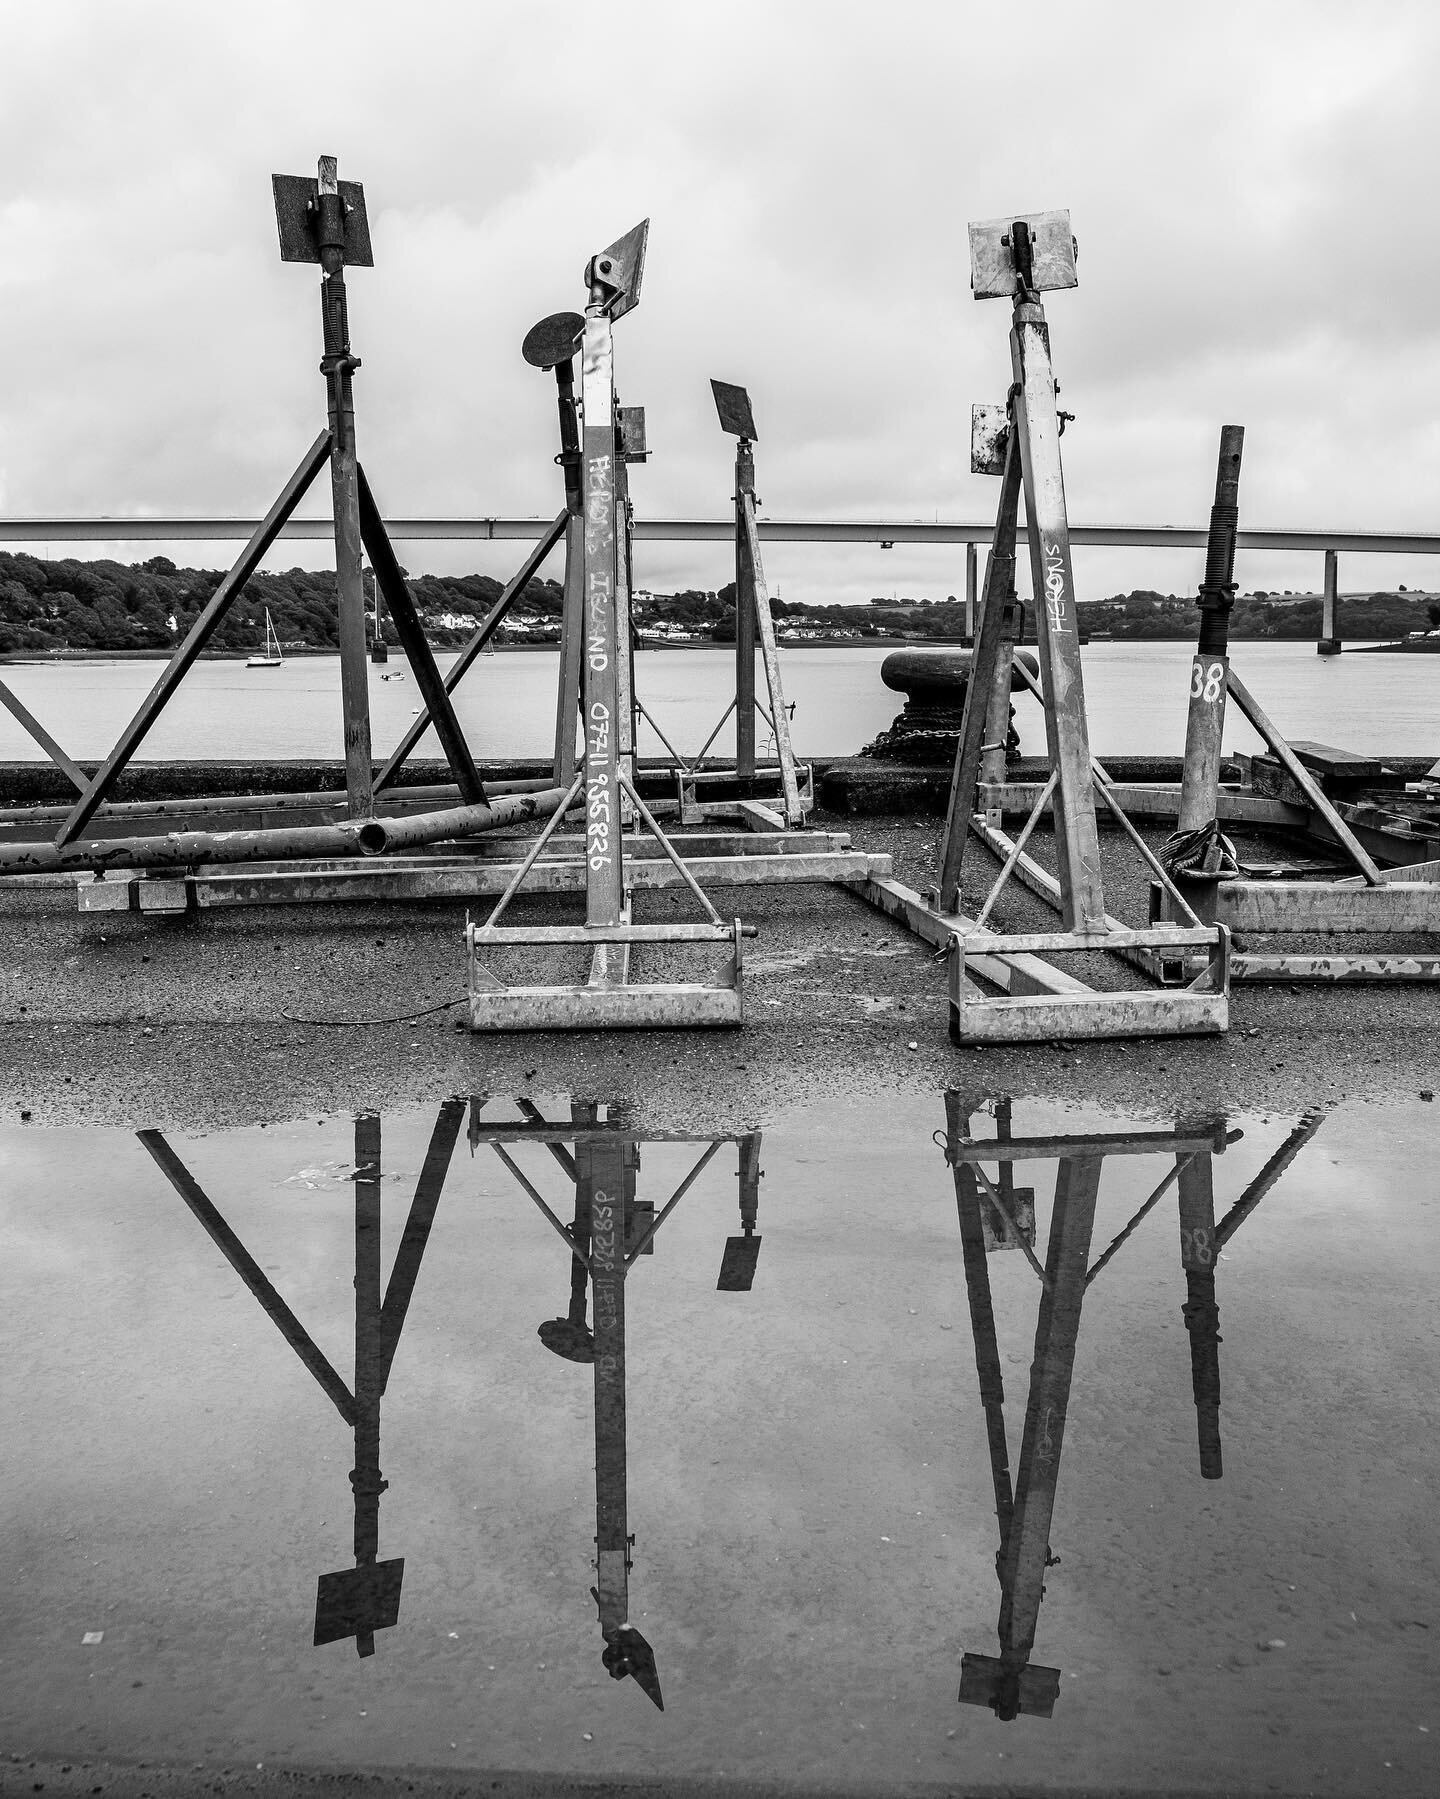 Feeling reflective looking back on this trio of photos captured on a trip West back in August 2021.

#2021 #bw #blackandwhite #blackwhite #reflection #reflective #coast #water #art #symmetry #industrial #walk #hallphoto #hallphotographic #explorer #w